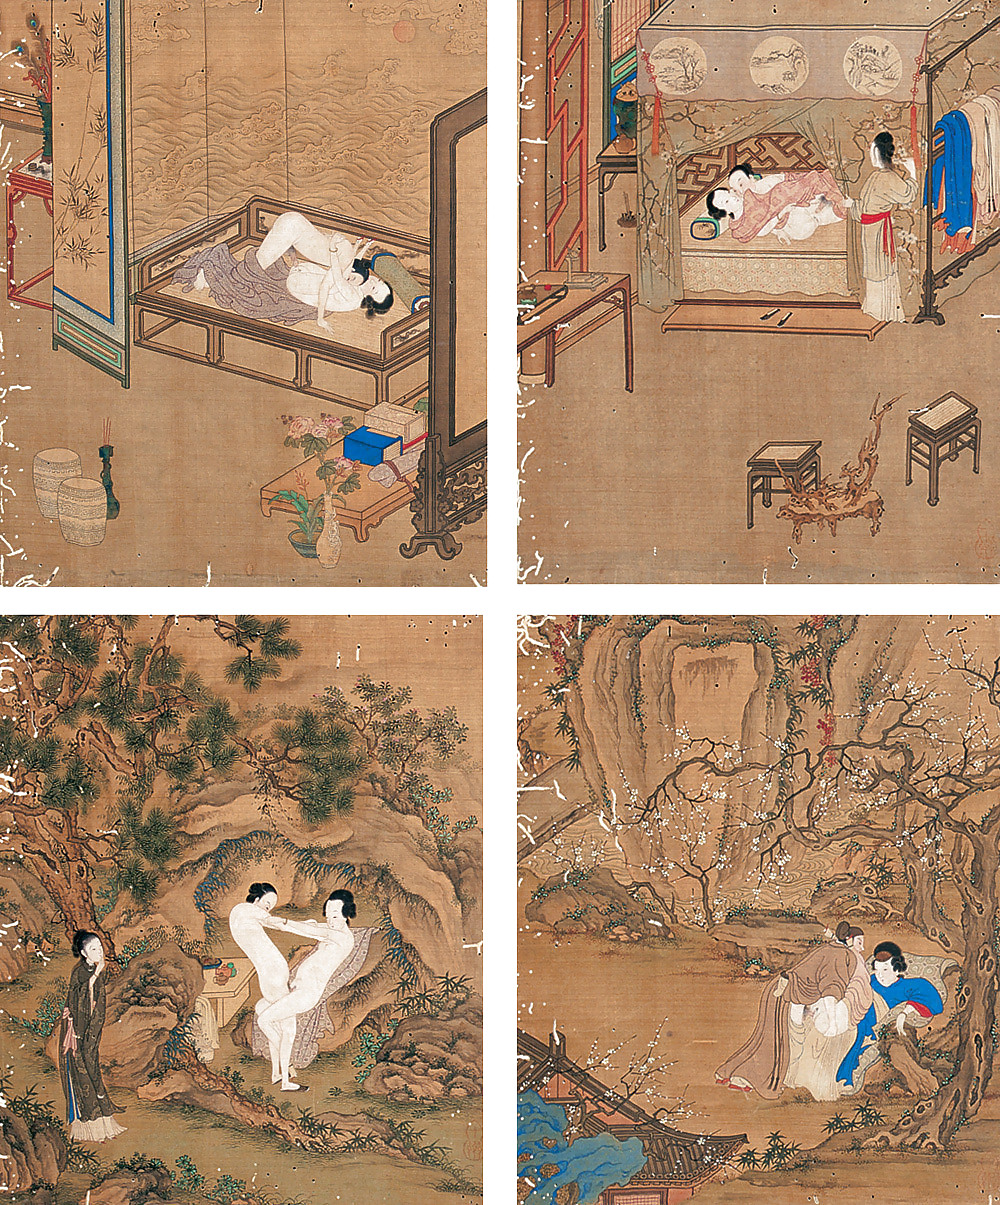 Drawn Ero and Porn Art 2 - Chinese Miniature Emperial Period #5517043